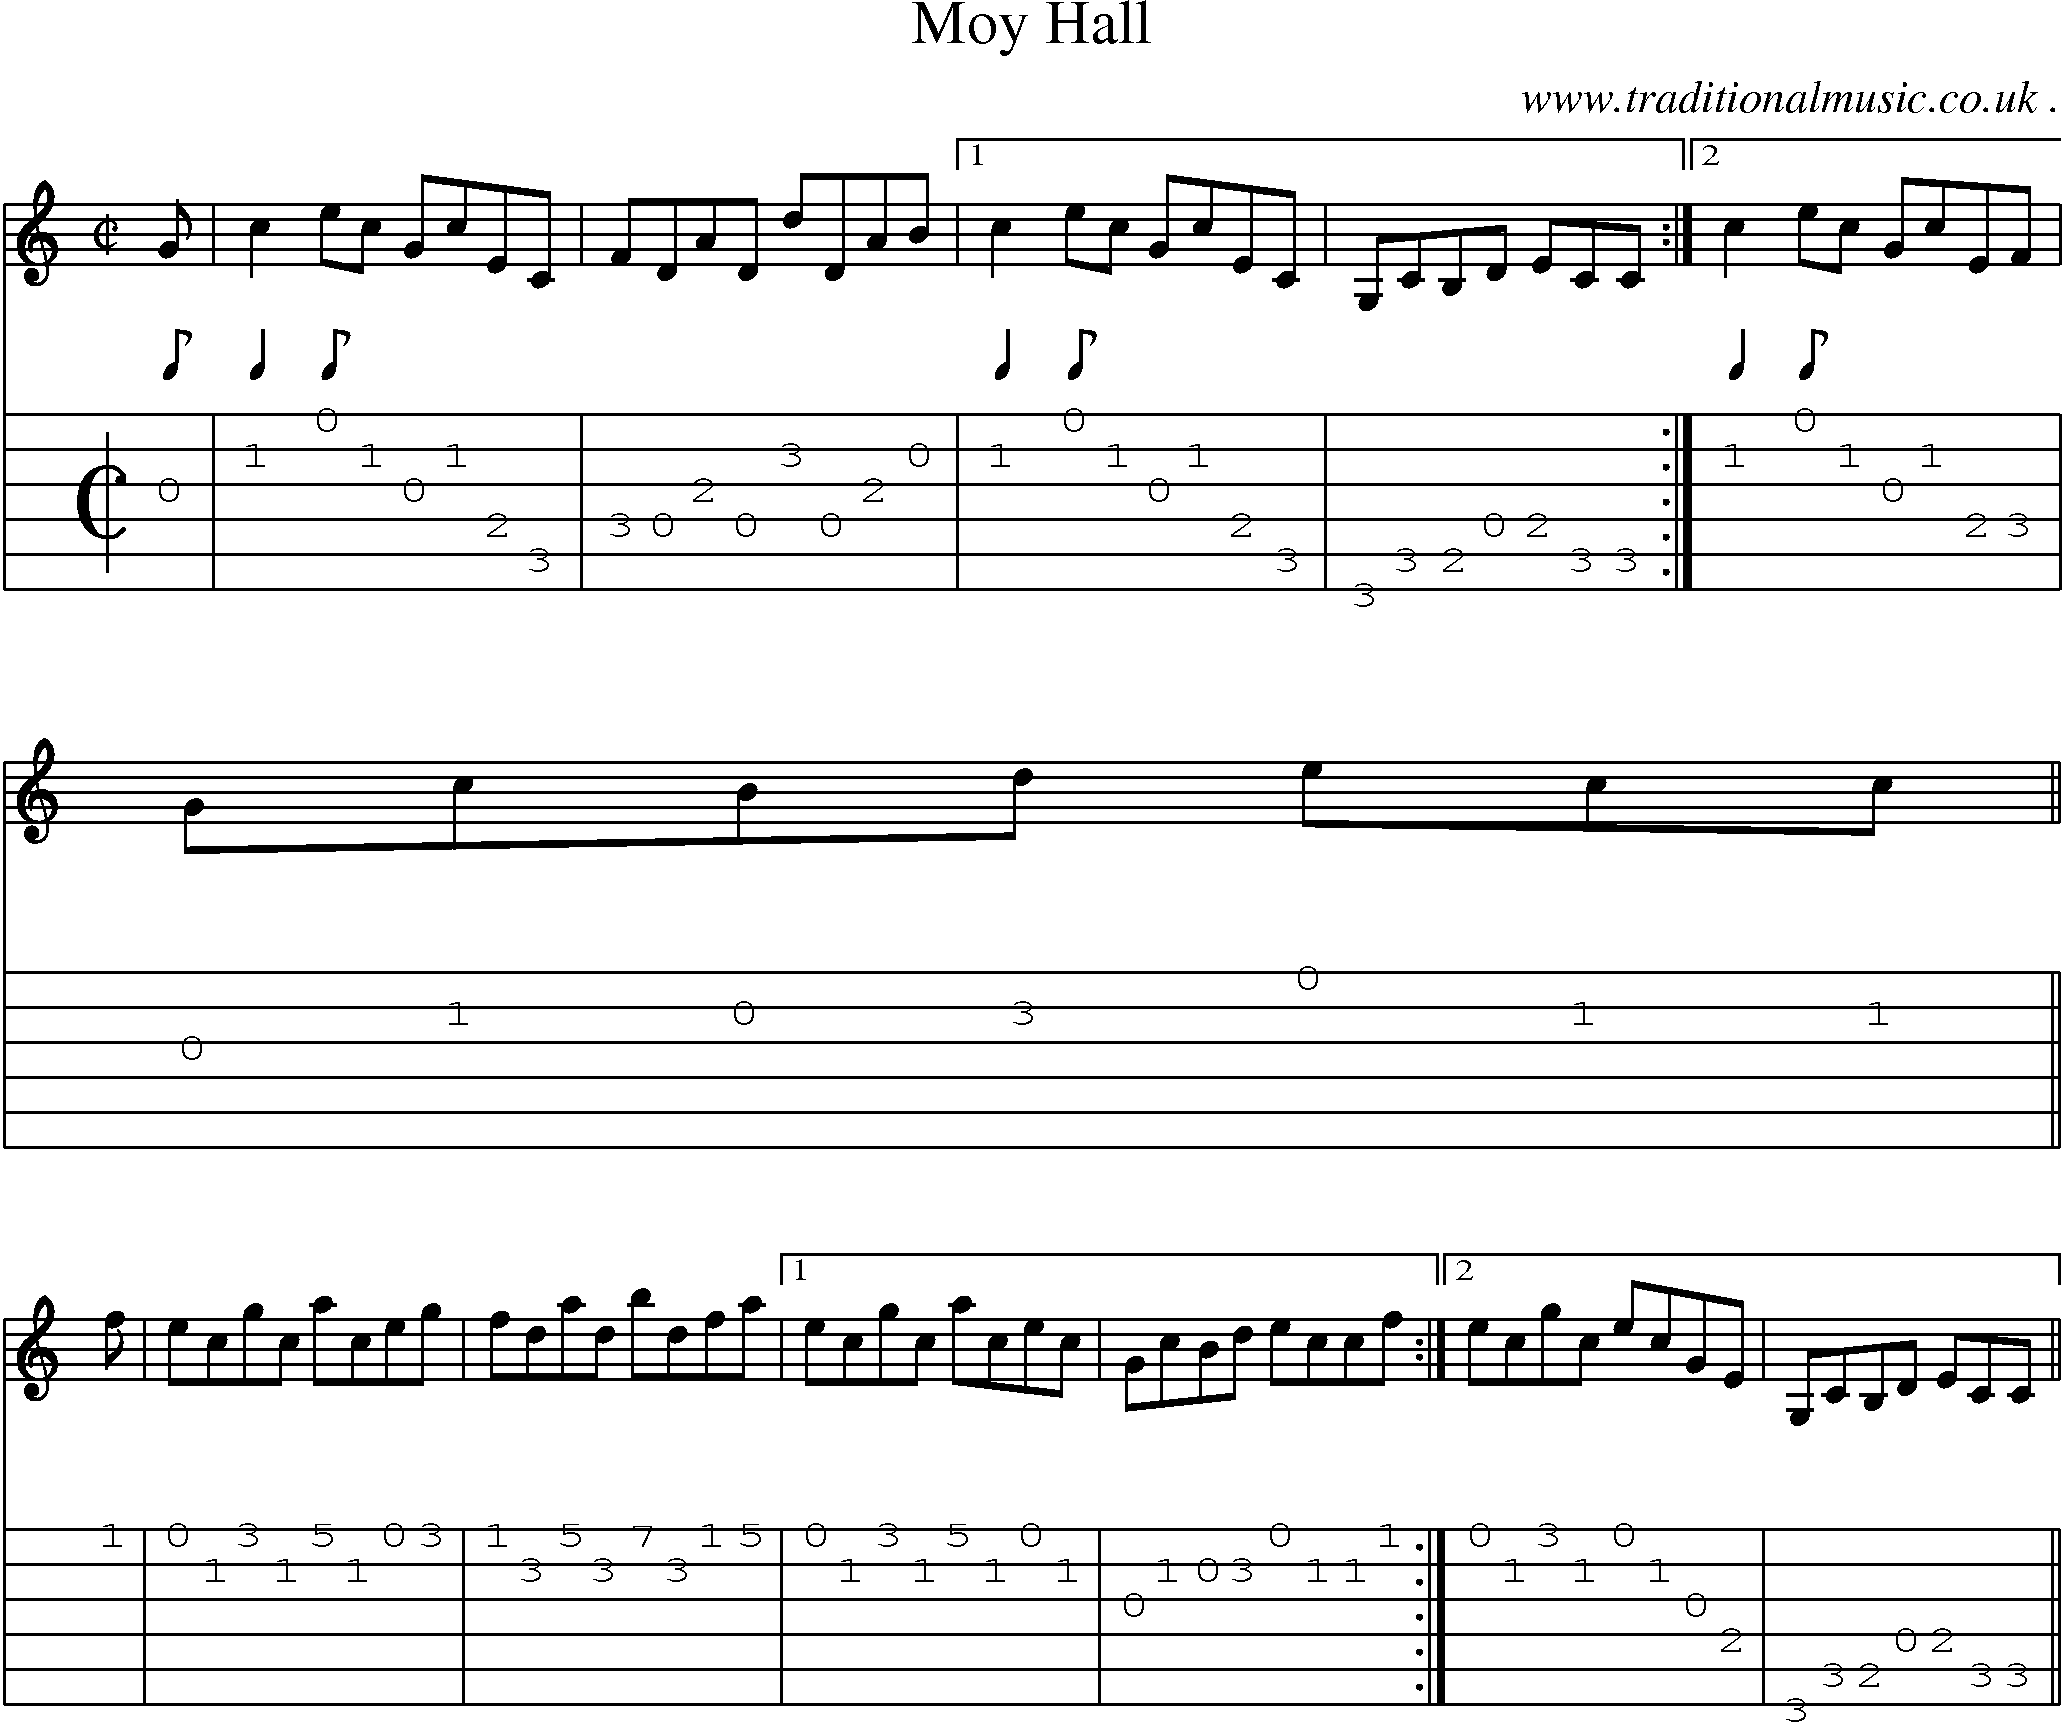 Sheet-music  score, Chords and Guitar Tabs for Moy Hall